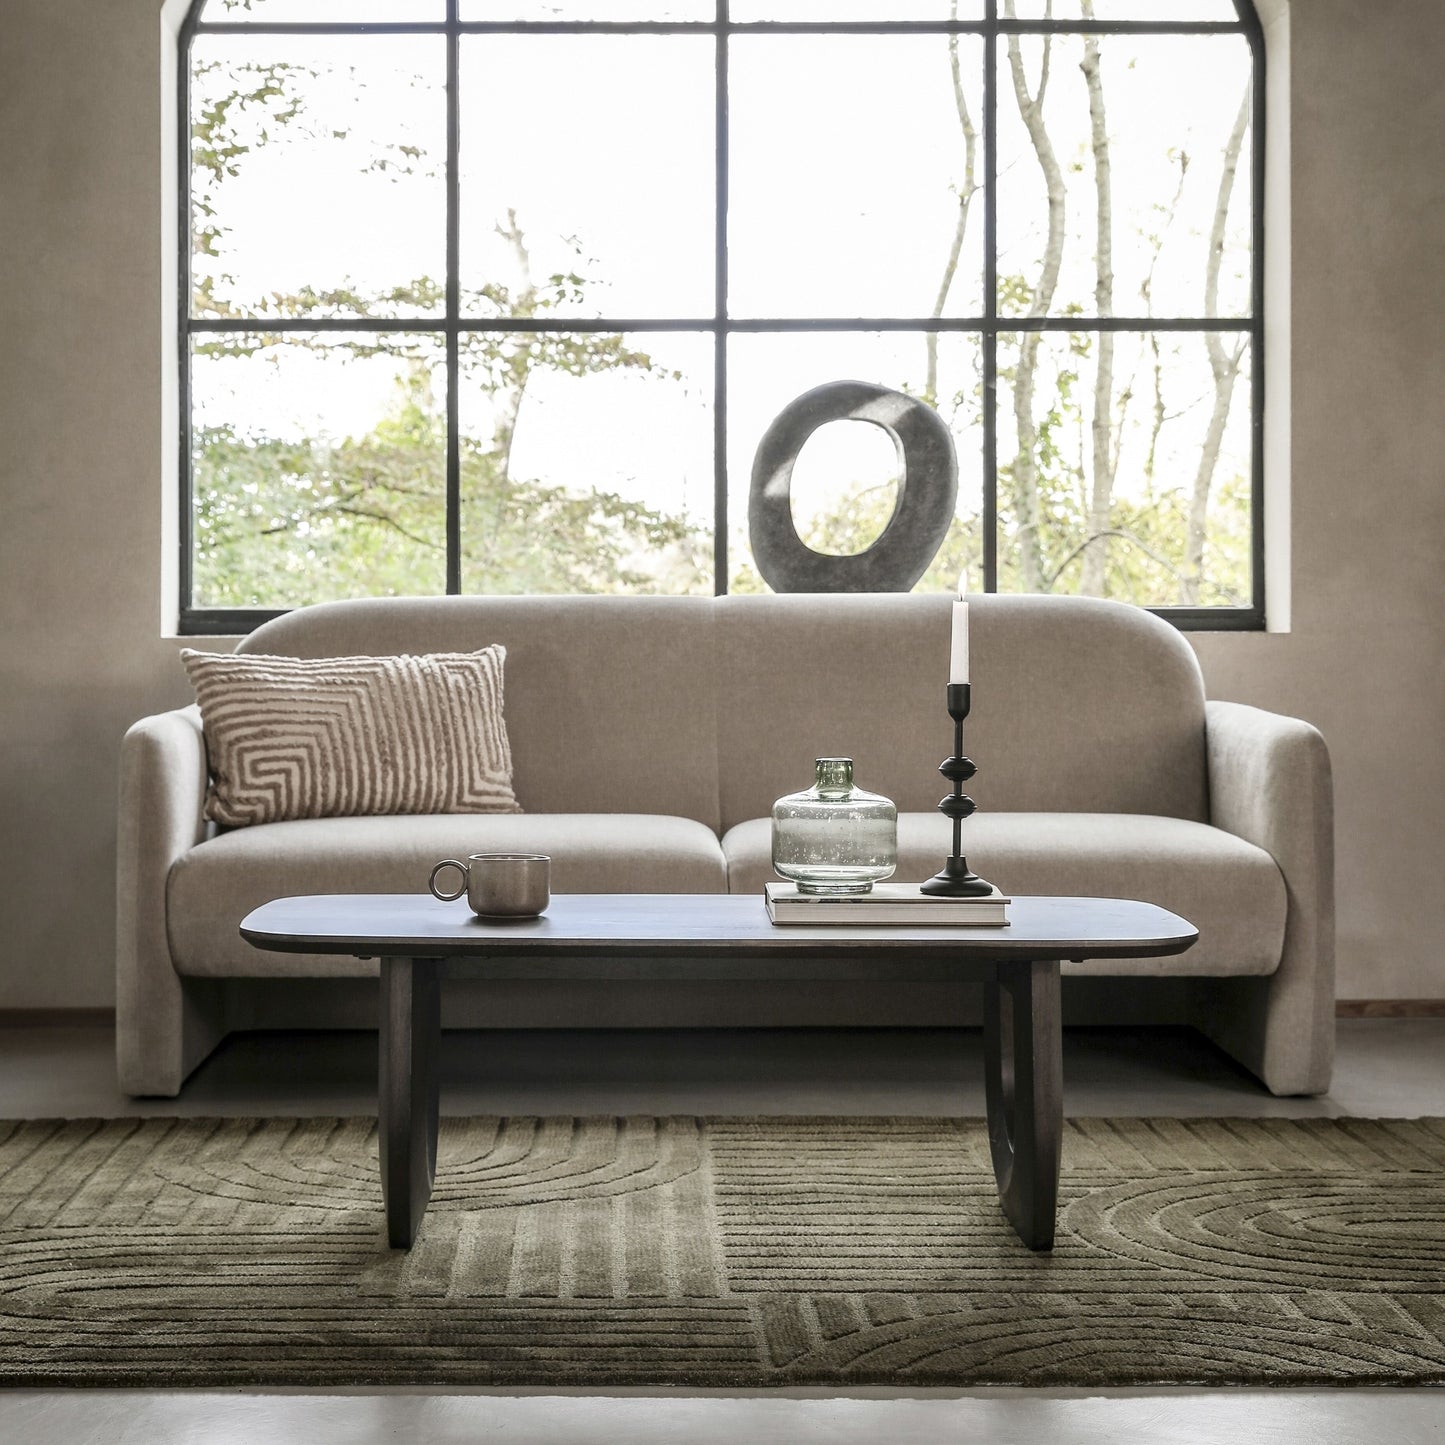 Blythe 3 Seater Sofa in Stone Beige